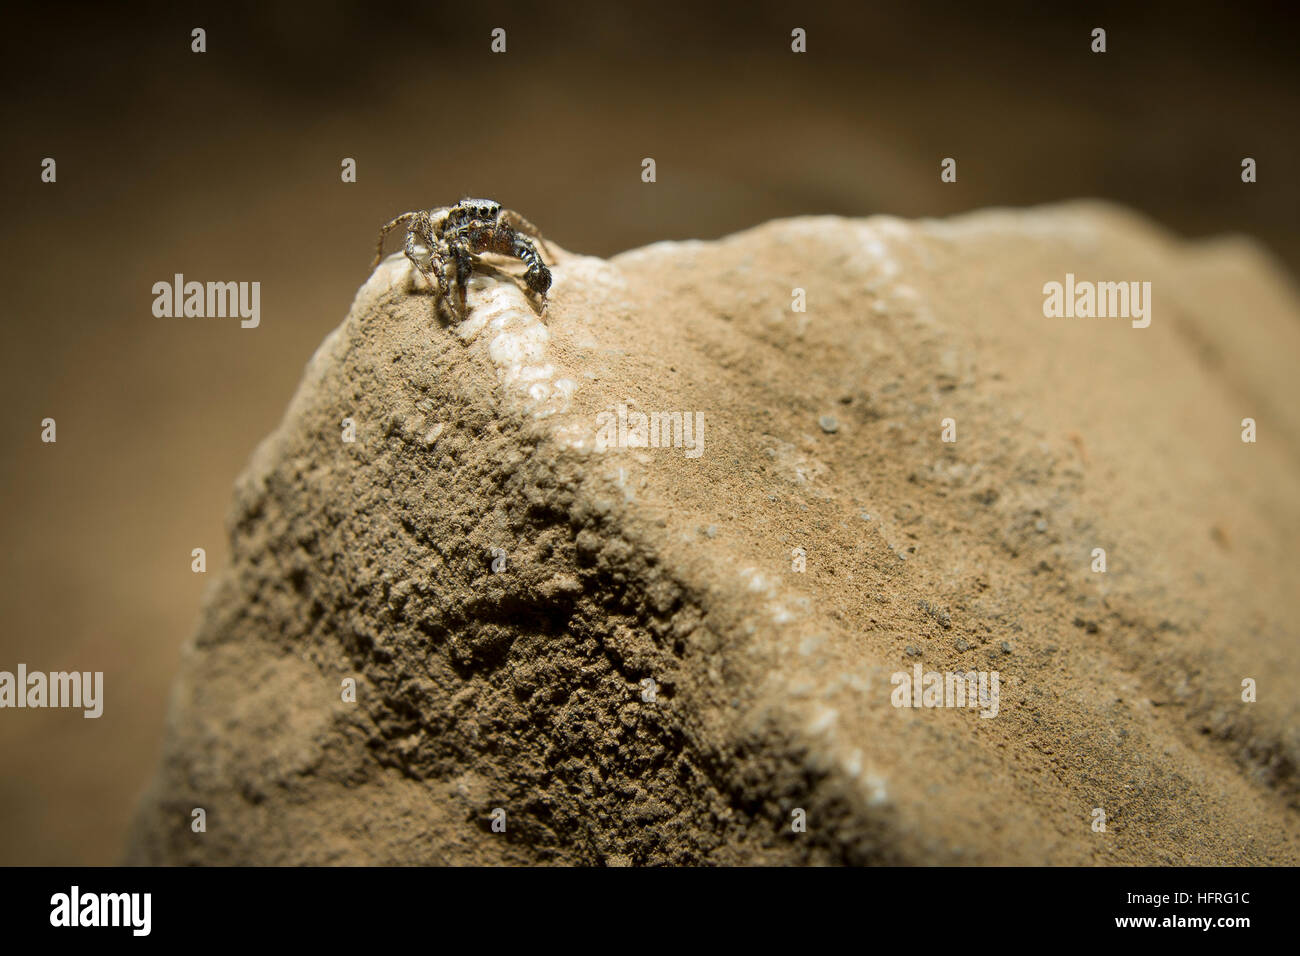 Male Habronattus oregonensis (a jumping spider) perched on a rock. Stock Photo